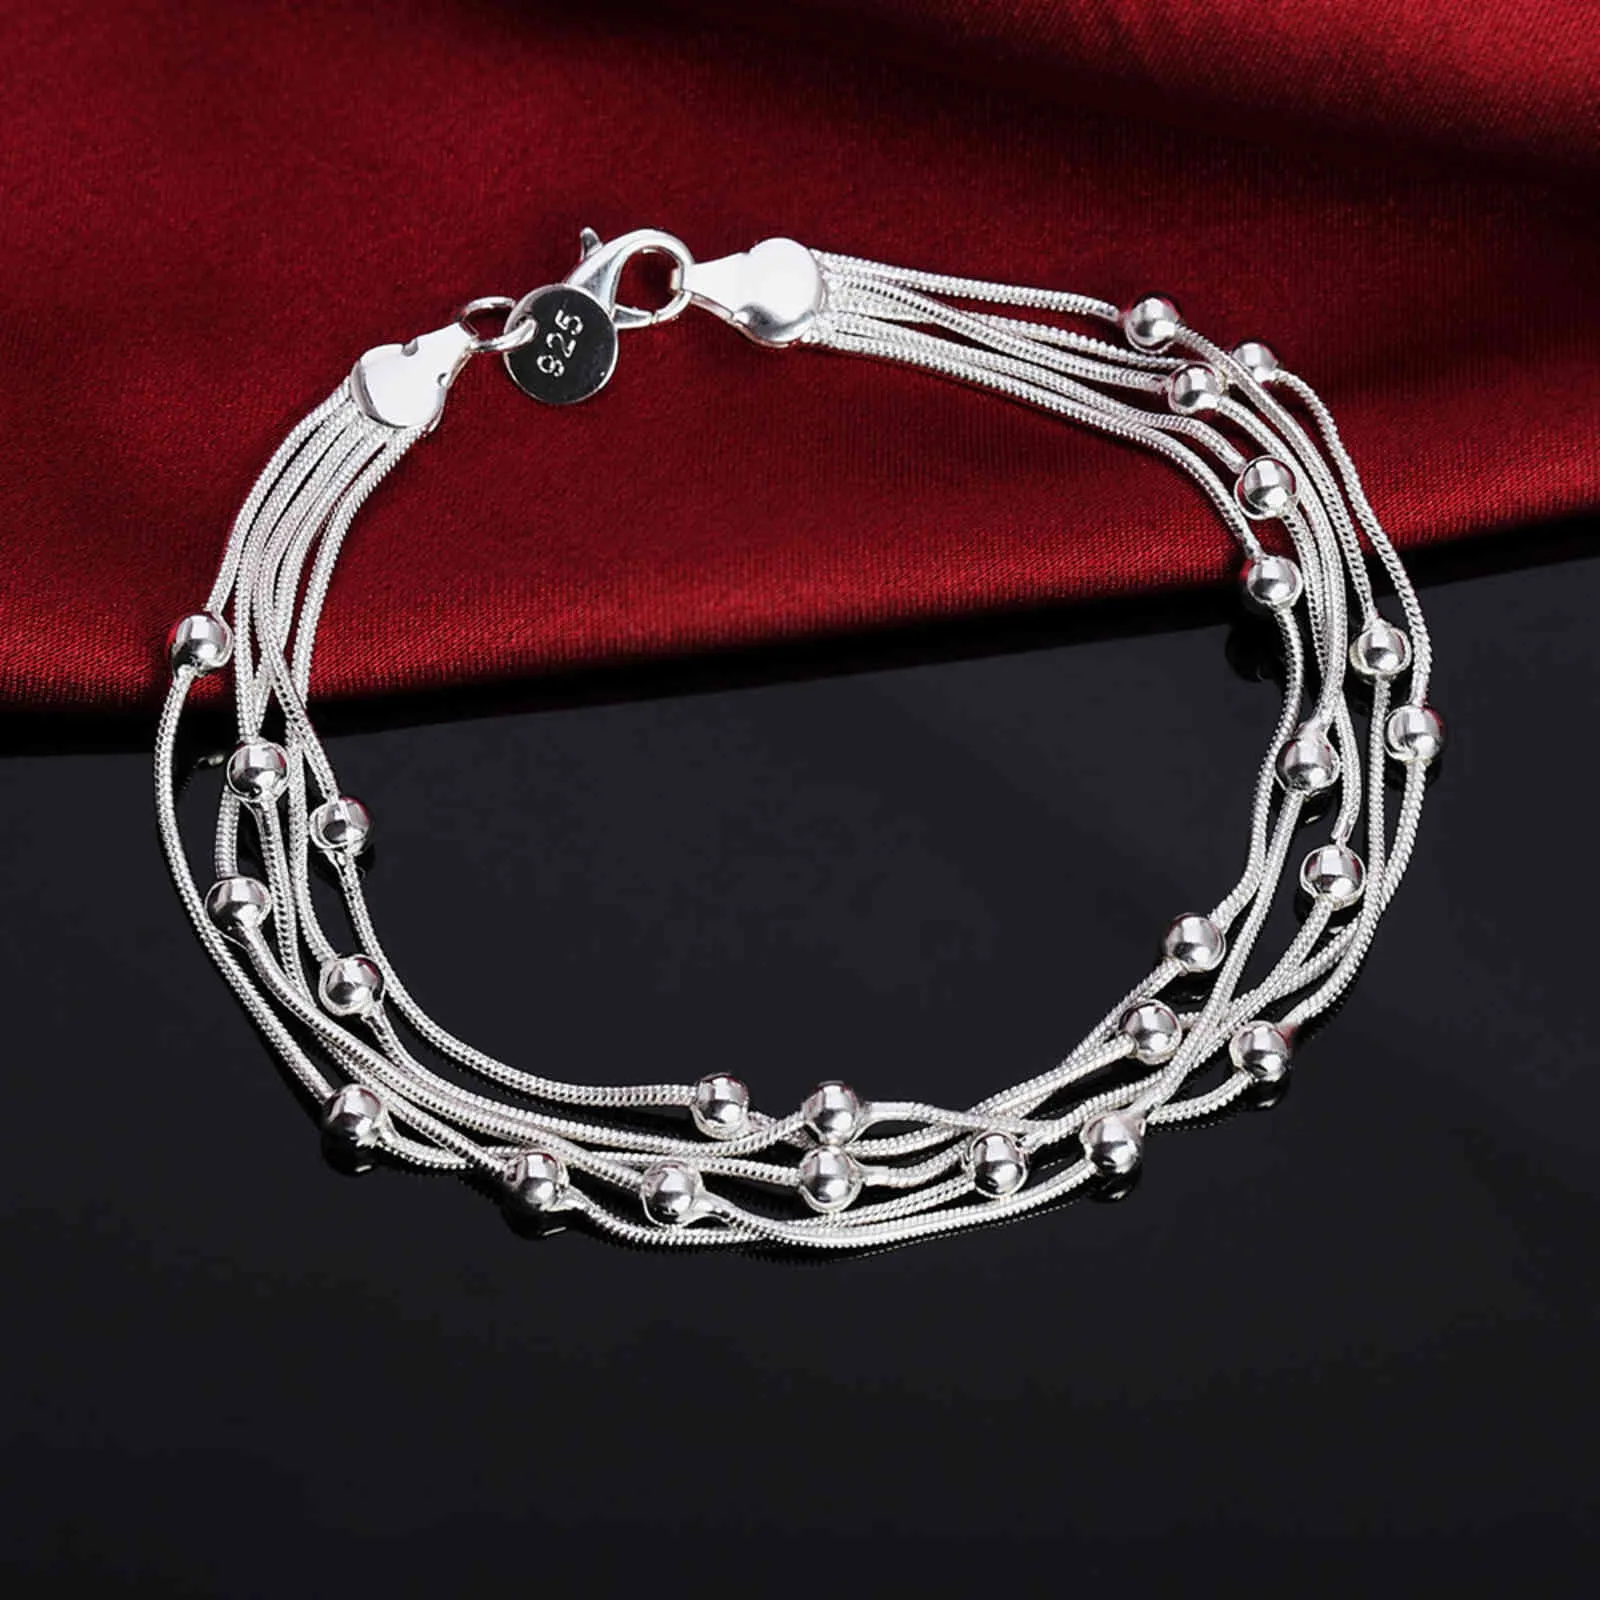 wholale , Charms beads Chain Beautiful bracelet sier color fashion for women Wedding nice bracelet jewelry JSHh236